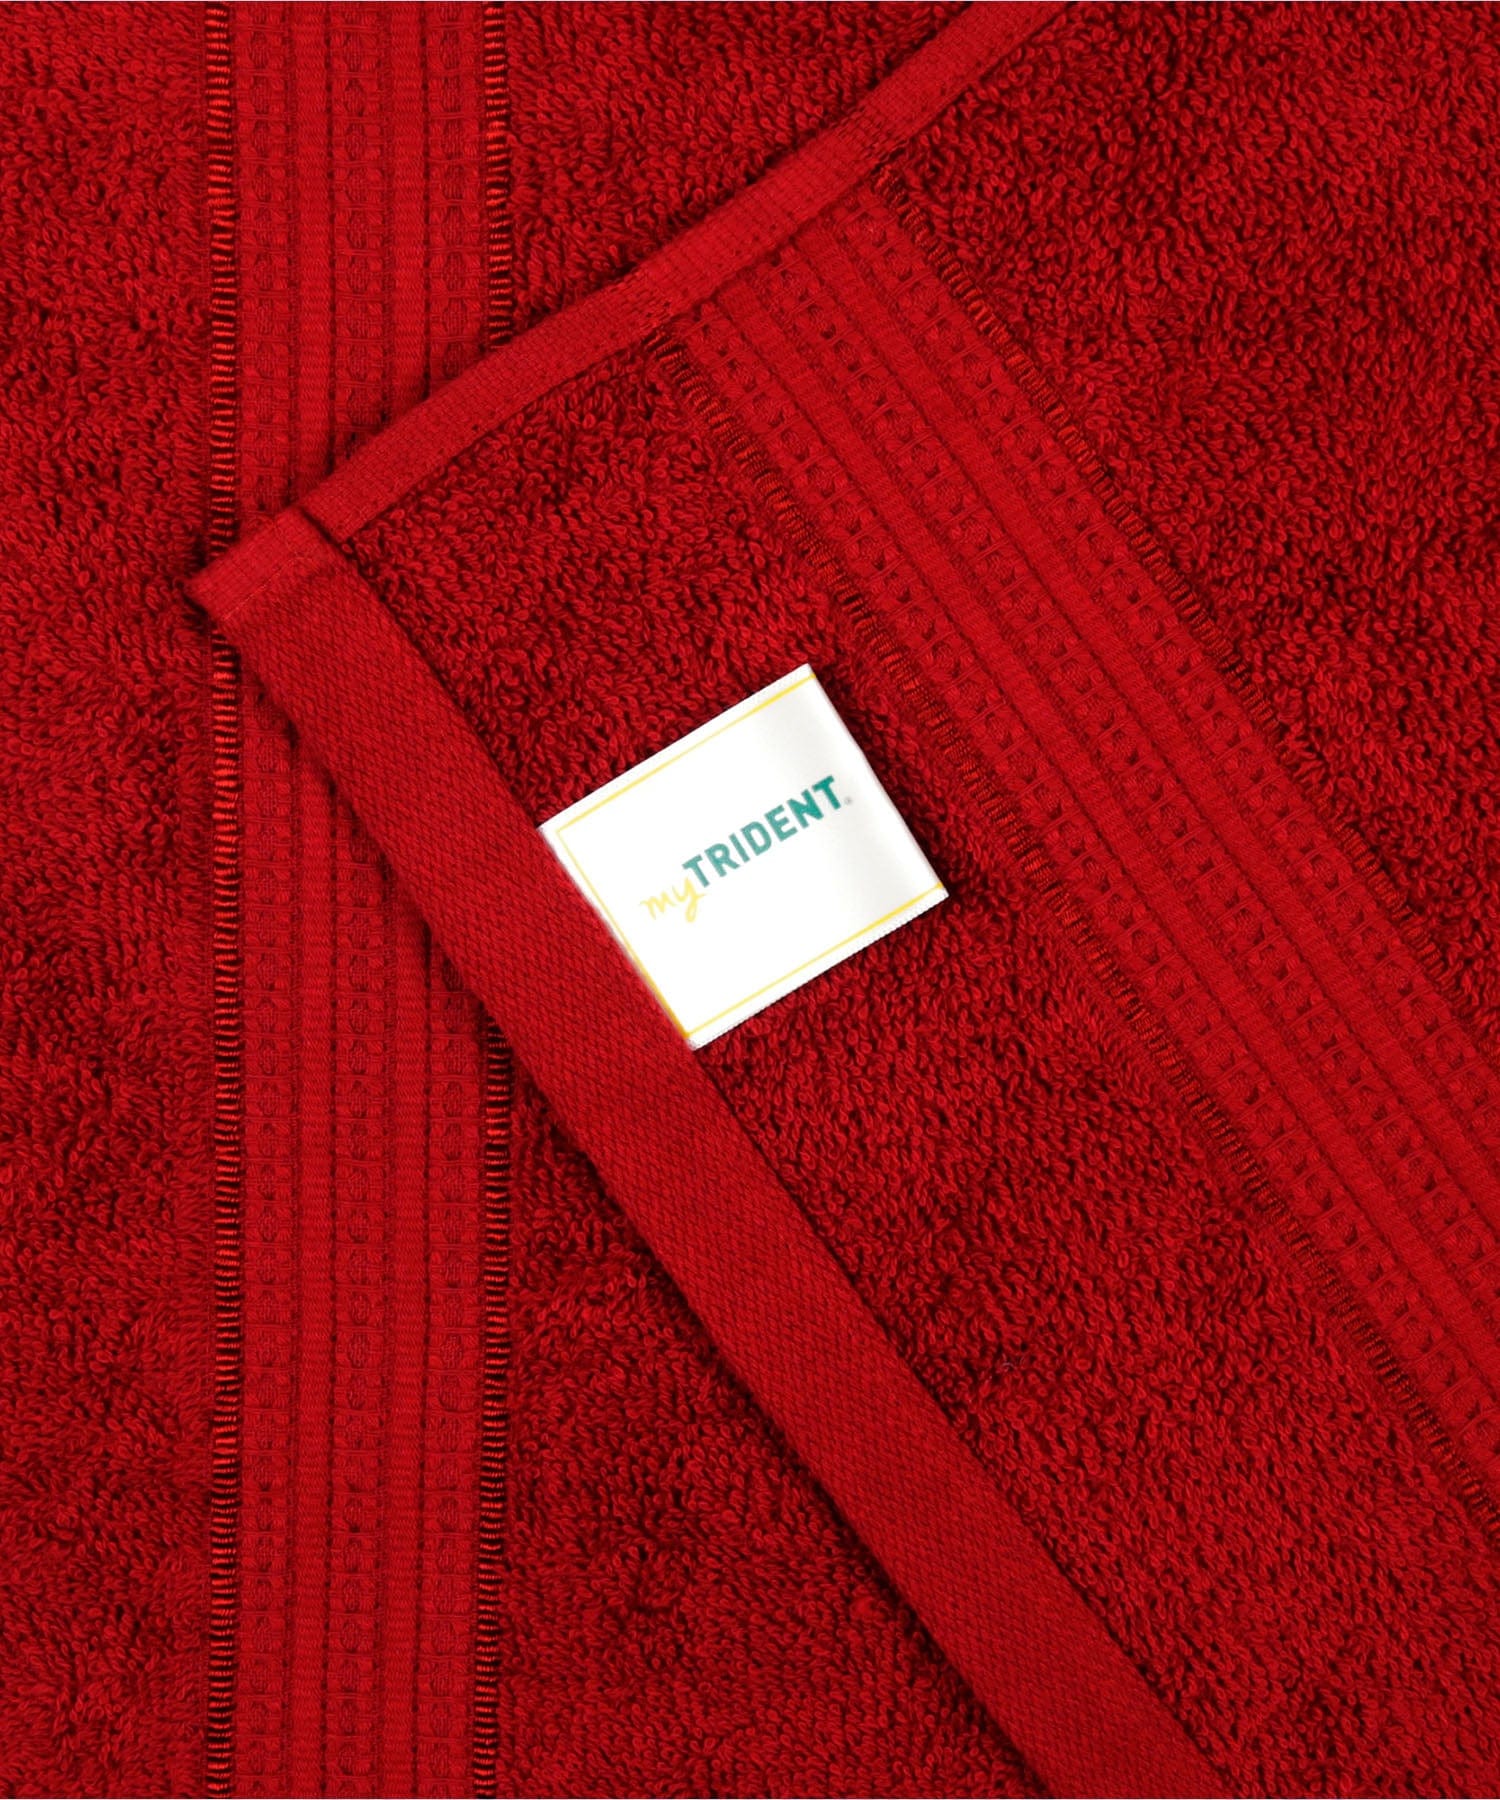 400 GSM , CARNIVAL TOWEL,100% Cotton,Durable,Super Soft, LOVELY RED